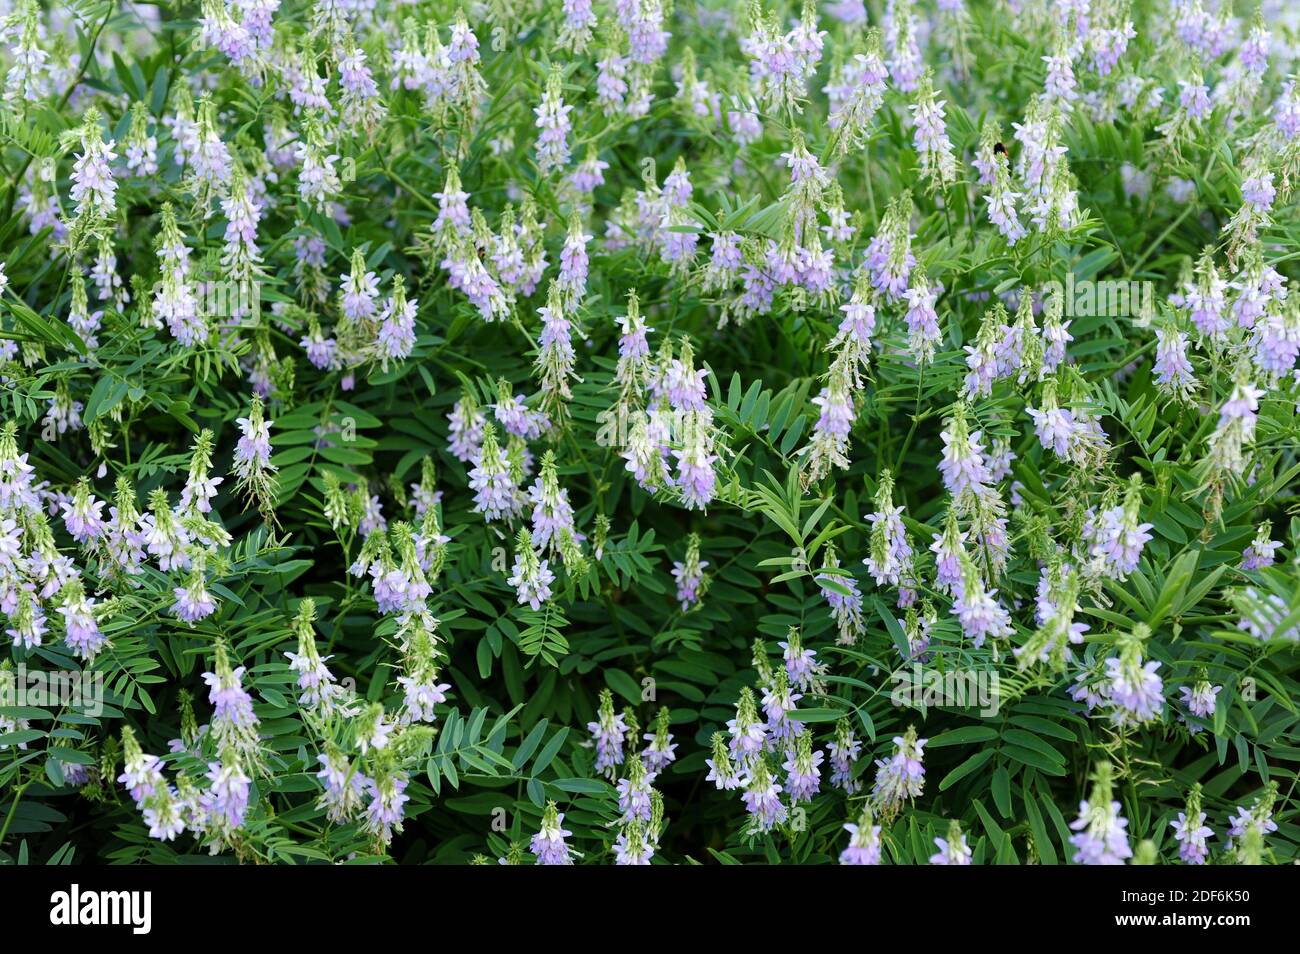 Goat rue (Galega officinalis) is a perennial herb native to Asia but naturalized in Europe. Stock Photo